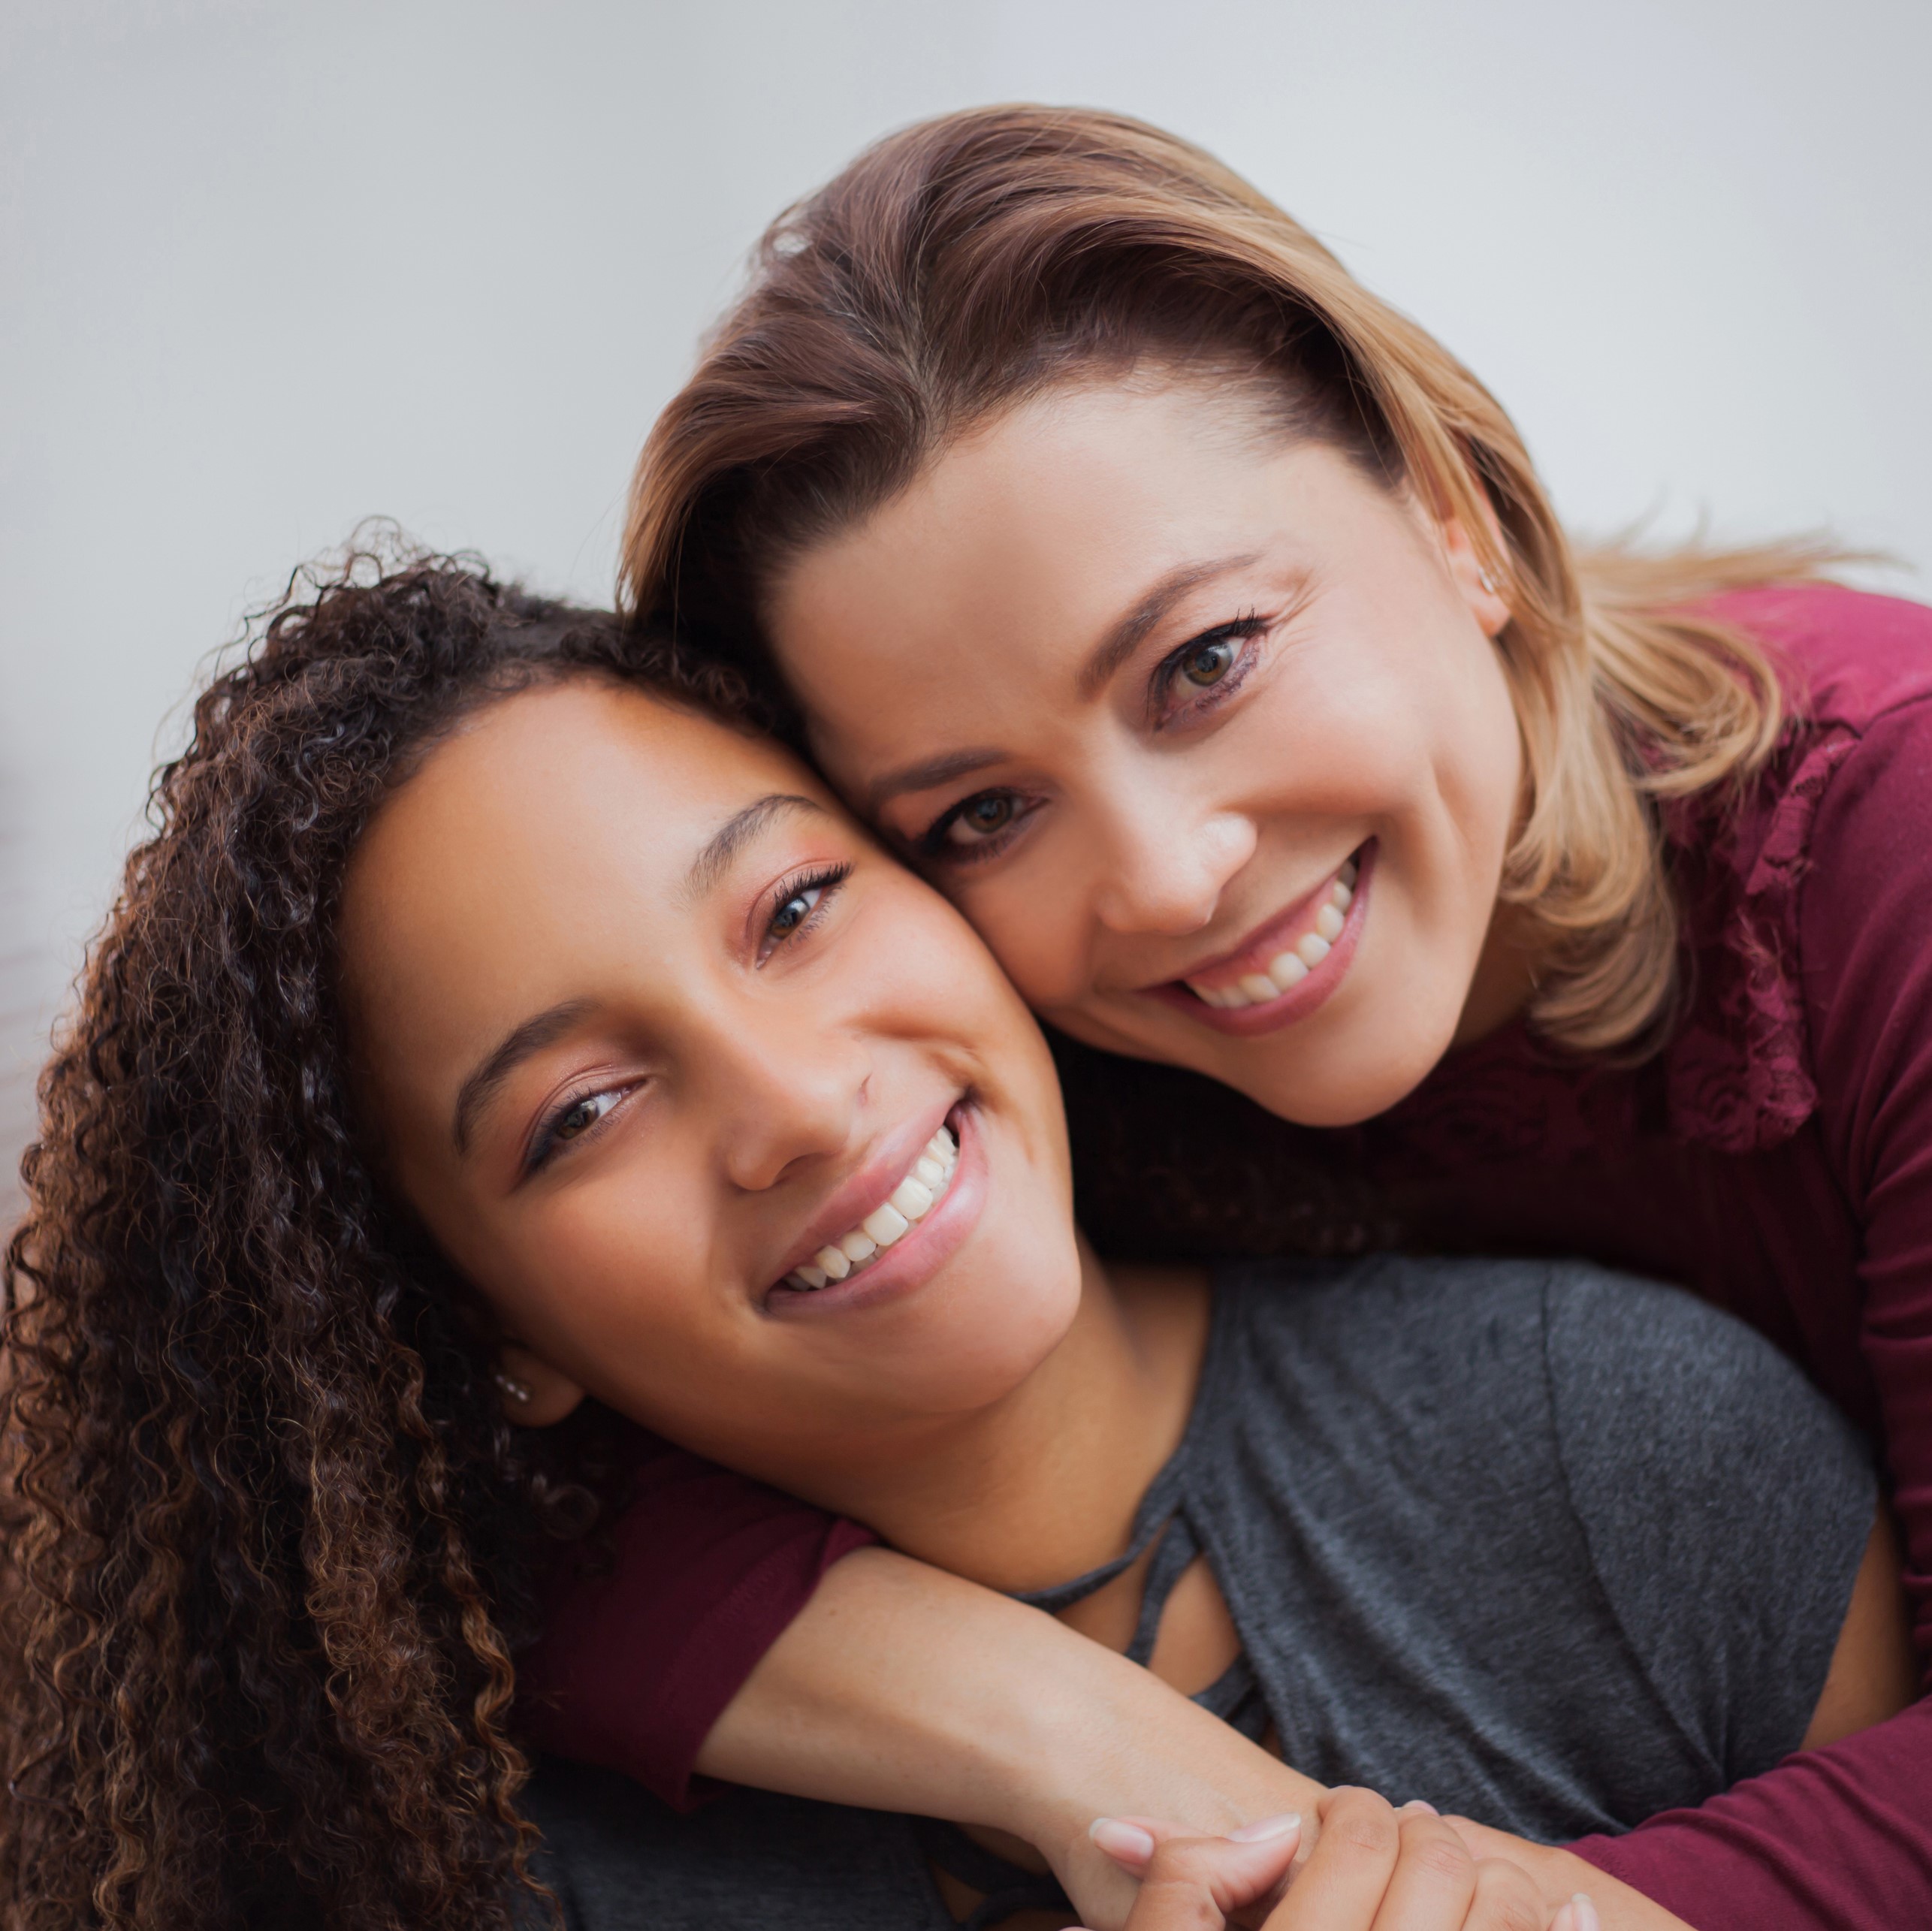 Portrait of a woman hugging her daughter, both people holding hands looking and smiling at the camera with a candid attitude